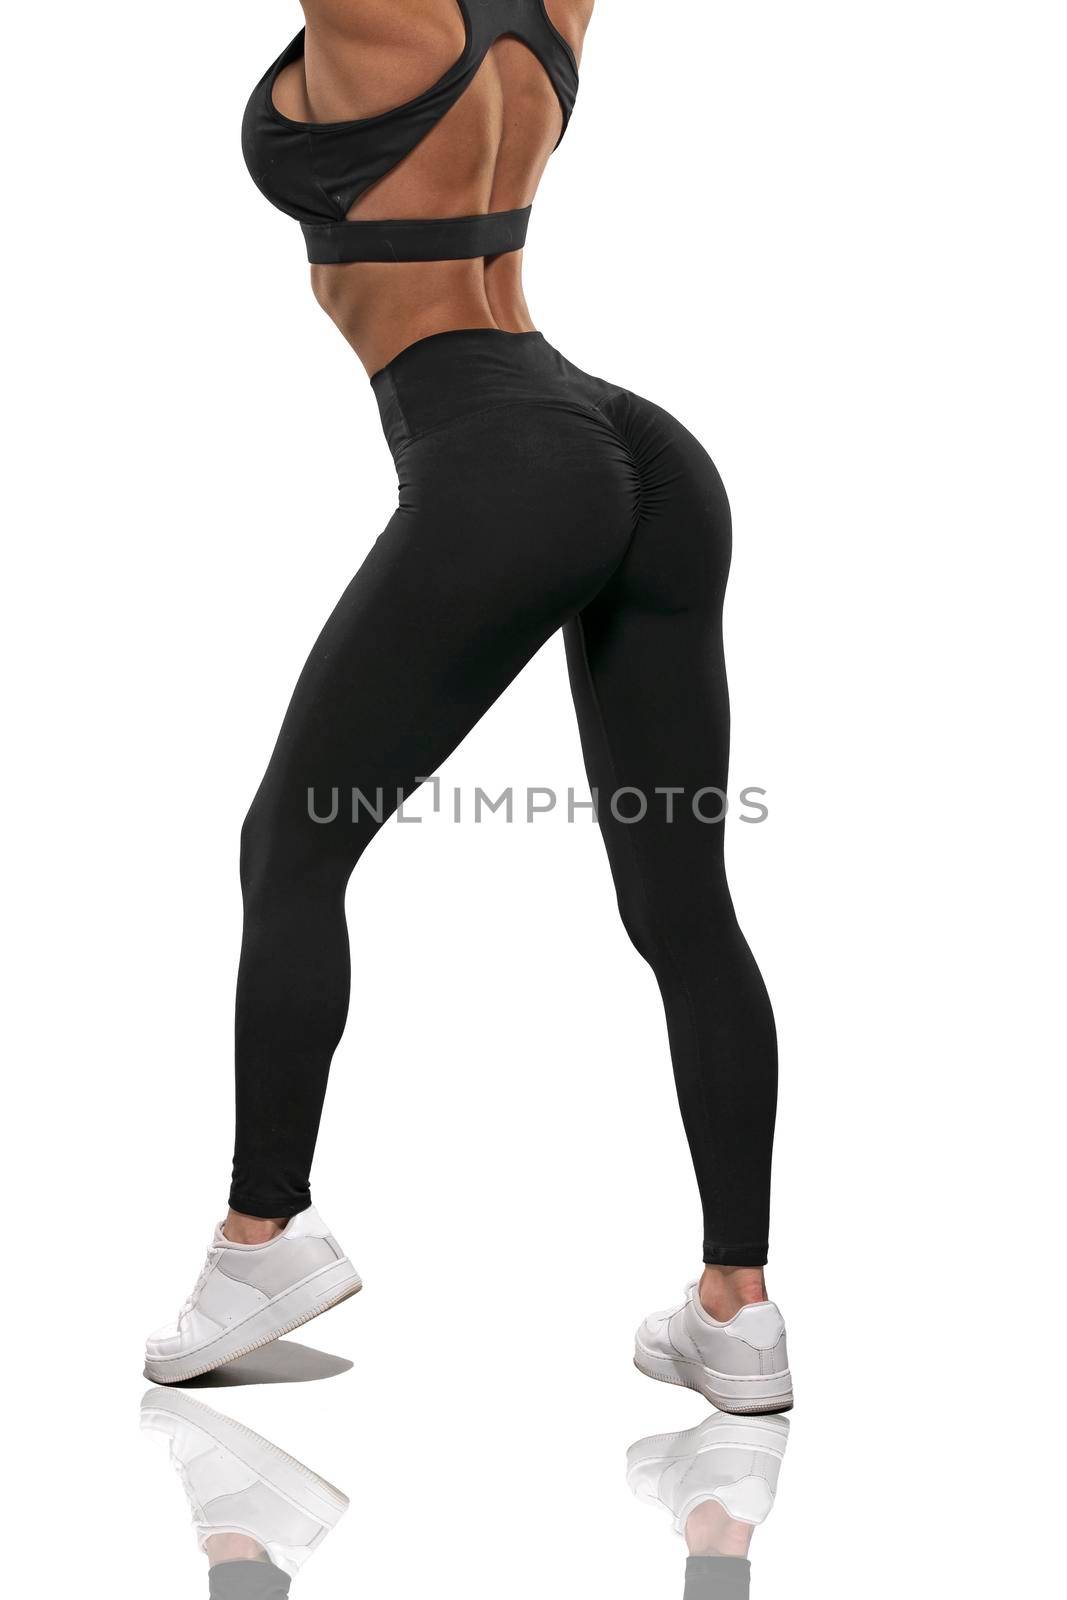 legs girl in black leggings and a top stay back on a white background by but_photo